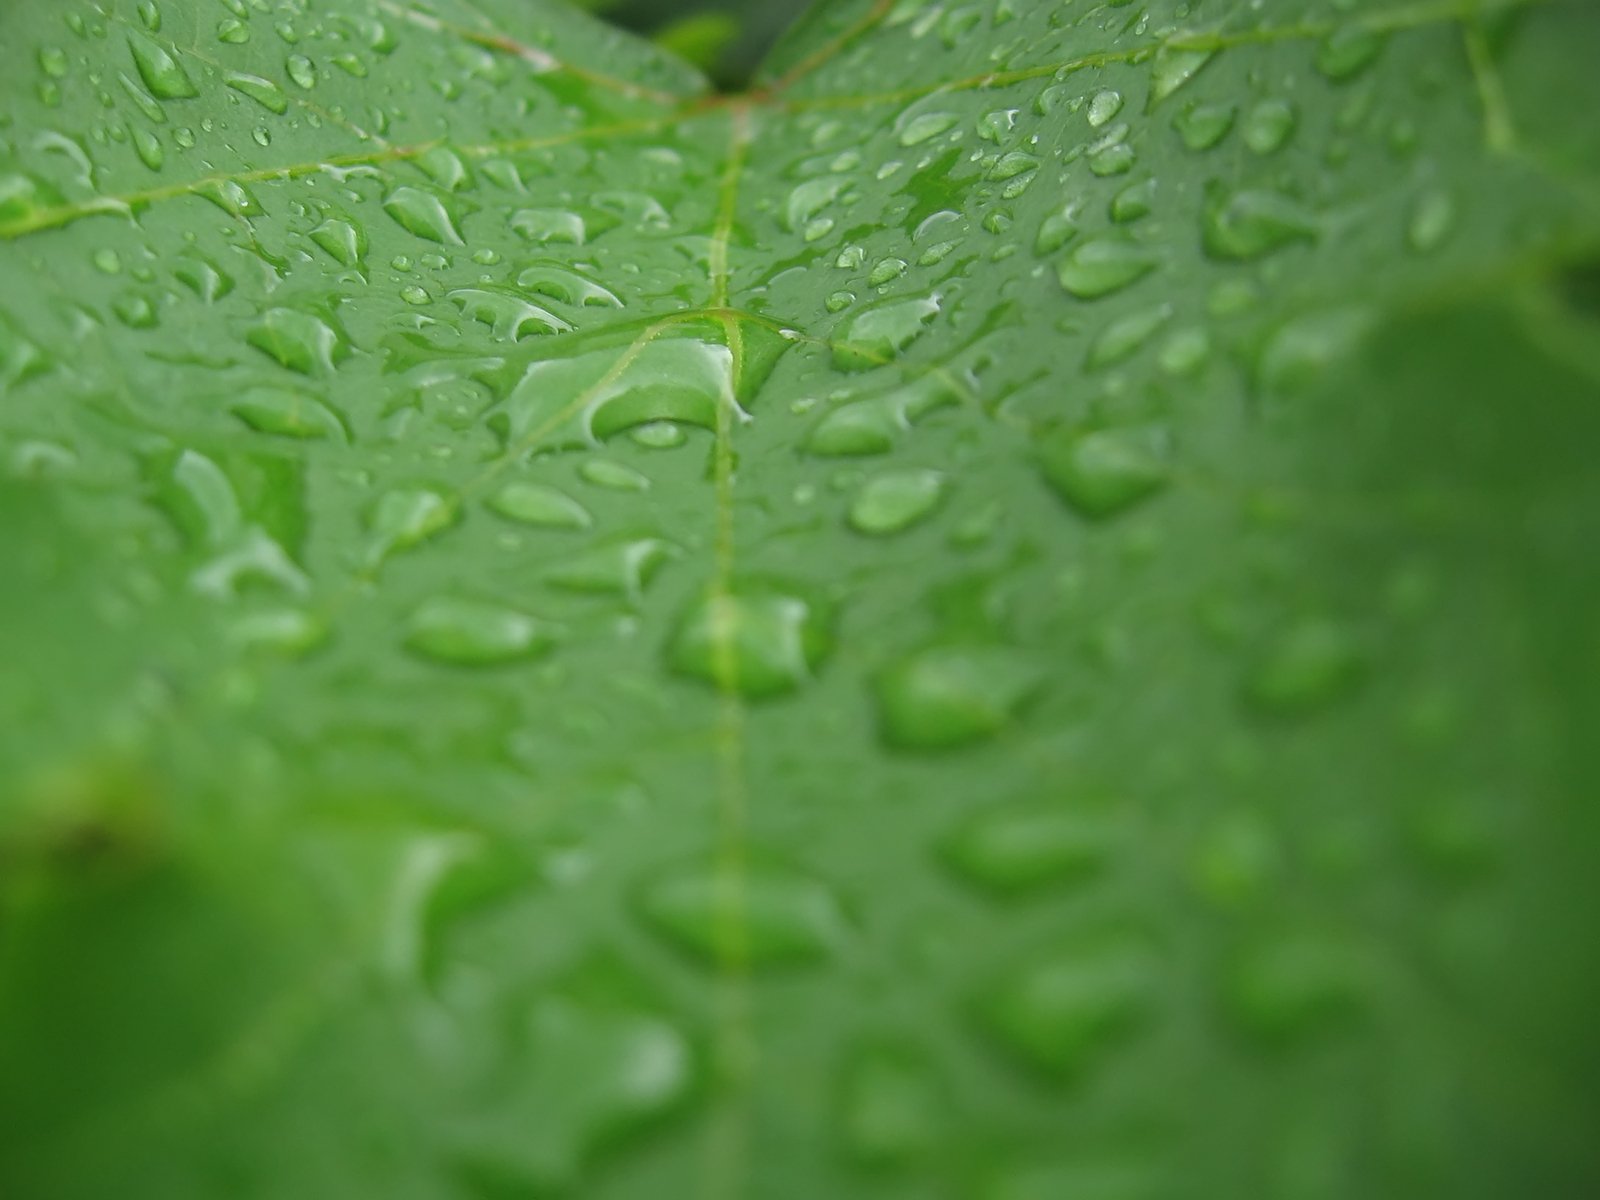 a picture taken in mid afternoon of dew droplets on a leaf